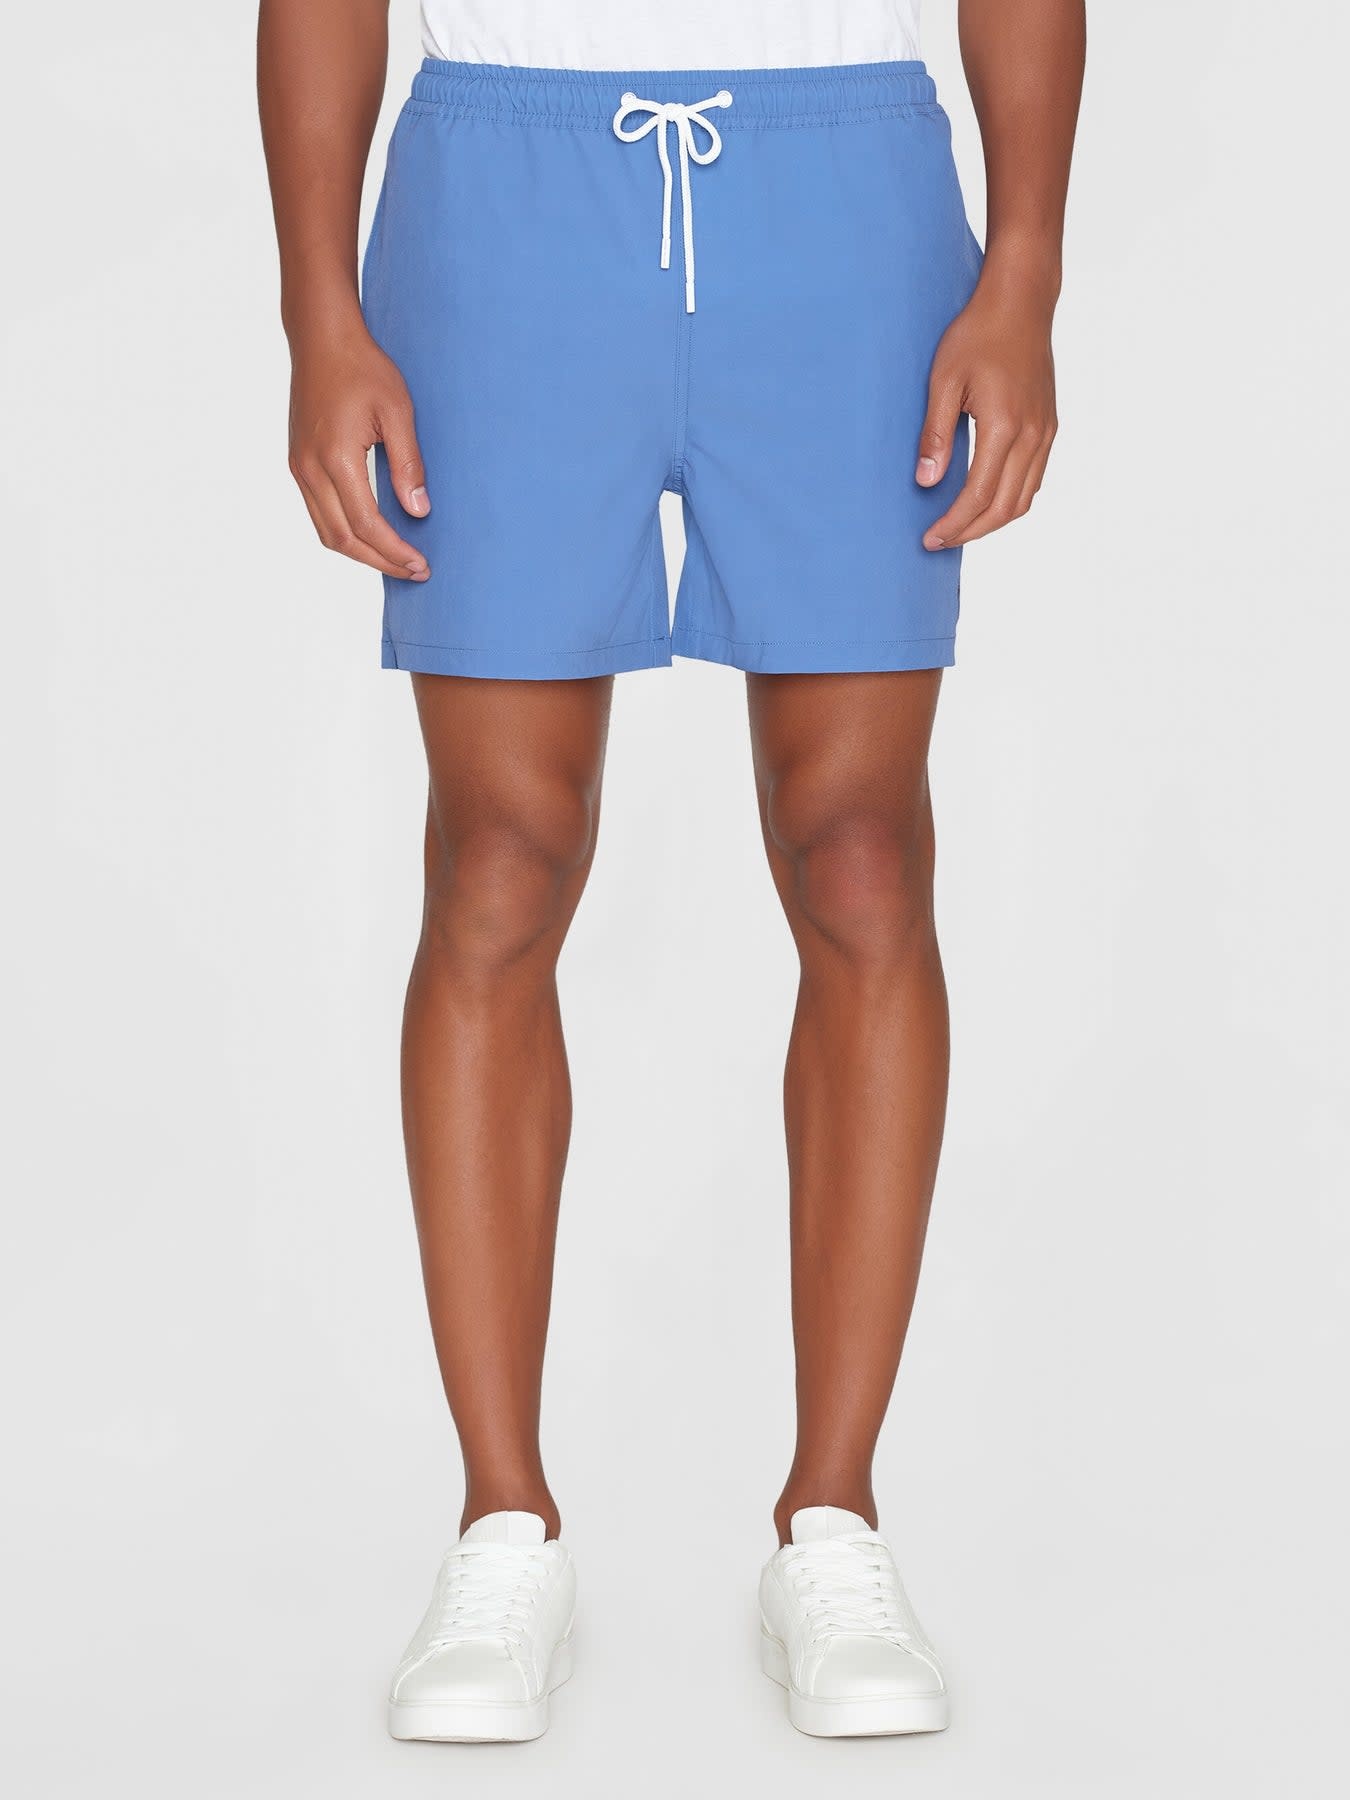 KnowledgeCotton Apparel KnowledgeCotton, Bay Swimshorts, moonlight blue, L